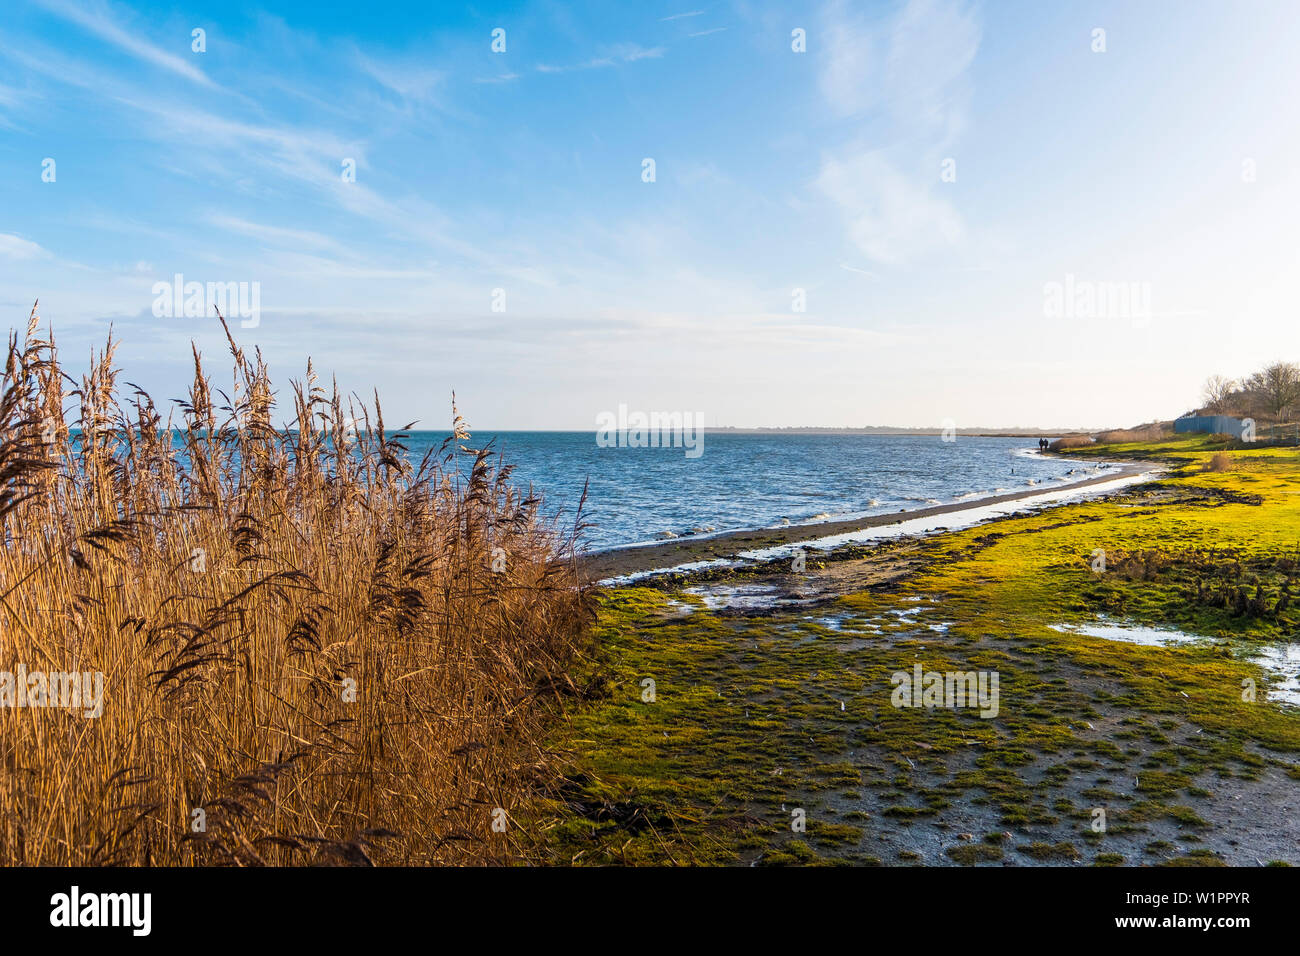 sunrise at Keitum on the island of Sylt, Schleswig-Holstein, north Germany, Germany Stock Photo